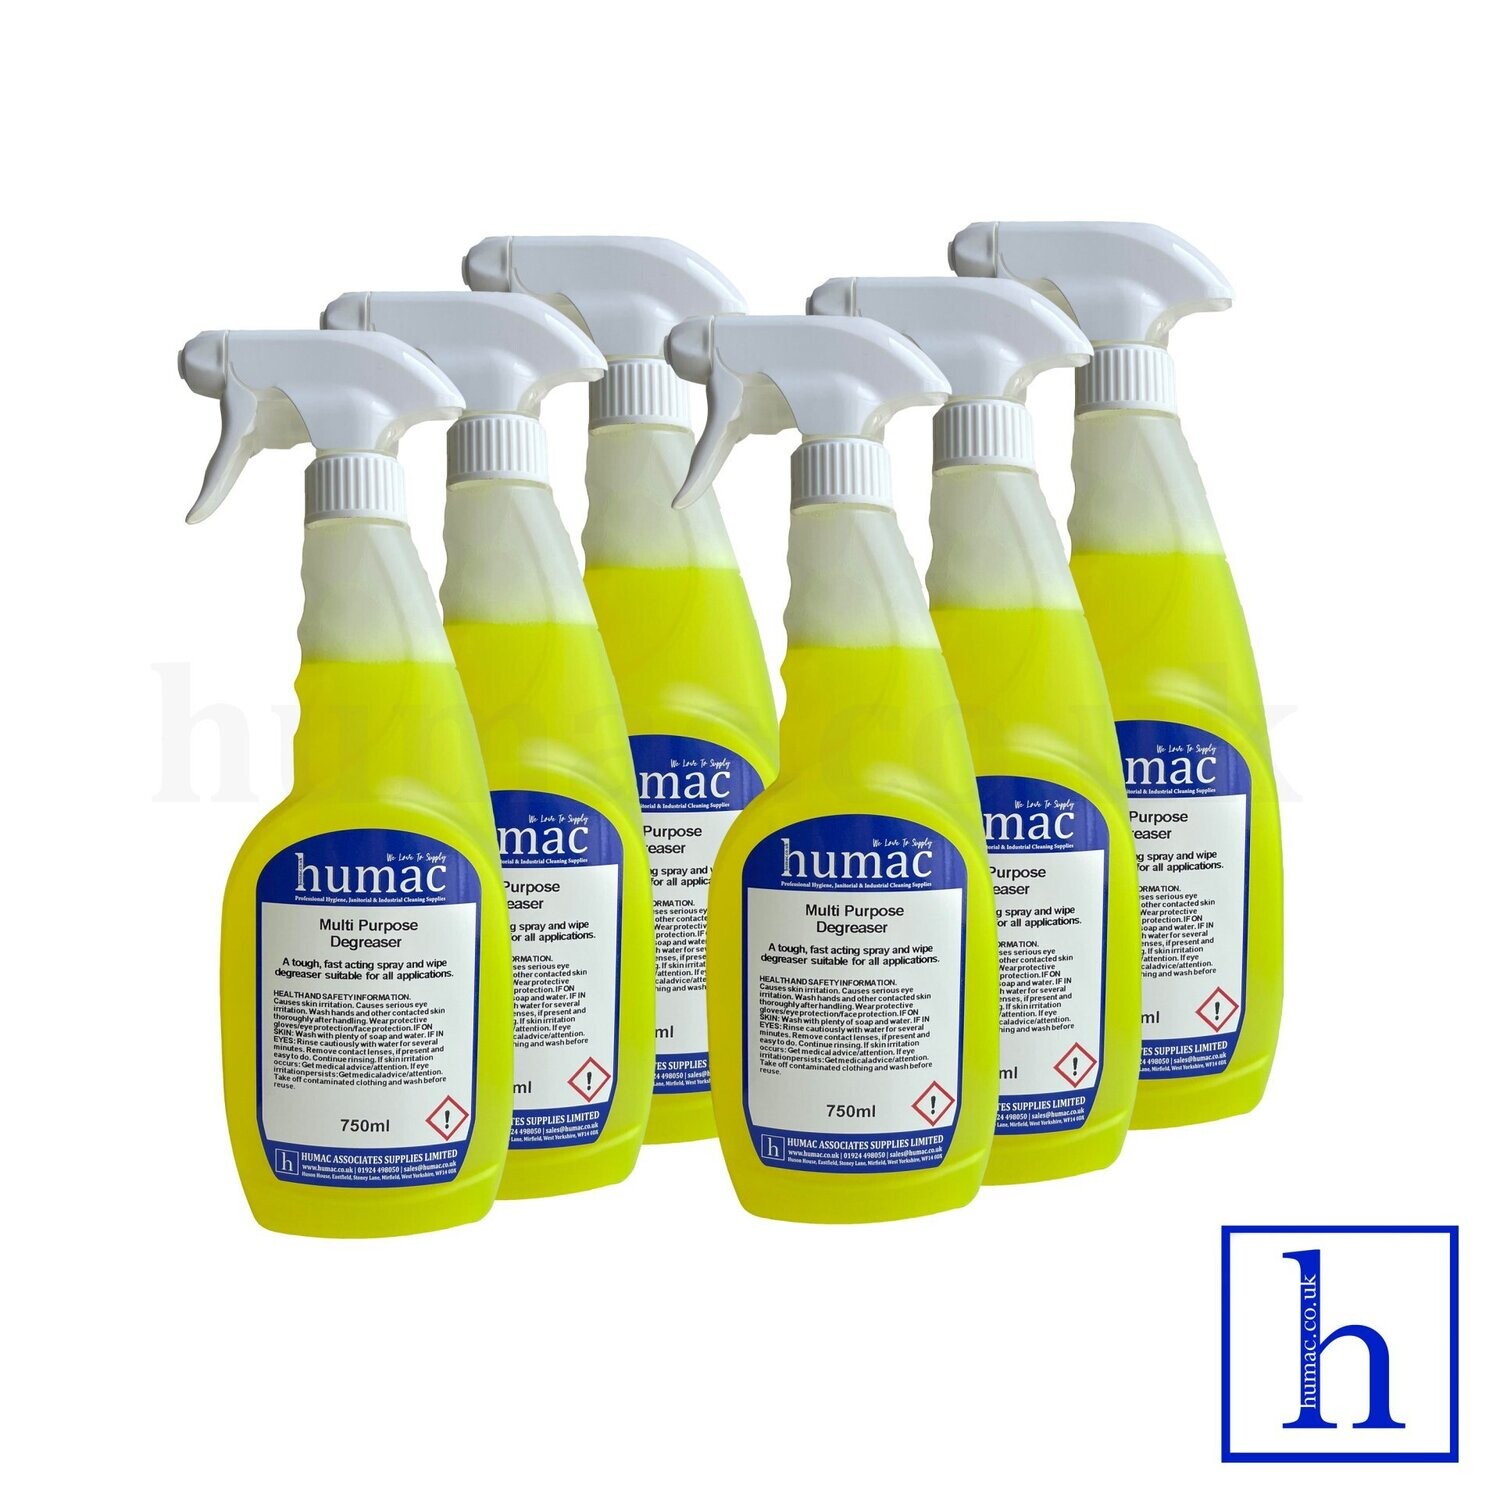 MULTI PURPOSE FAST ACTING DEGREASER - ELBOW GREASE SPRAY CLEANER  PROFESSIONAL ALL SURFACE PURPOSE CLEANER 6 X